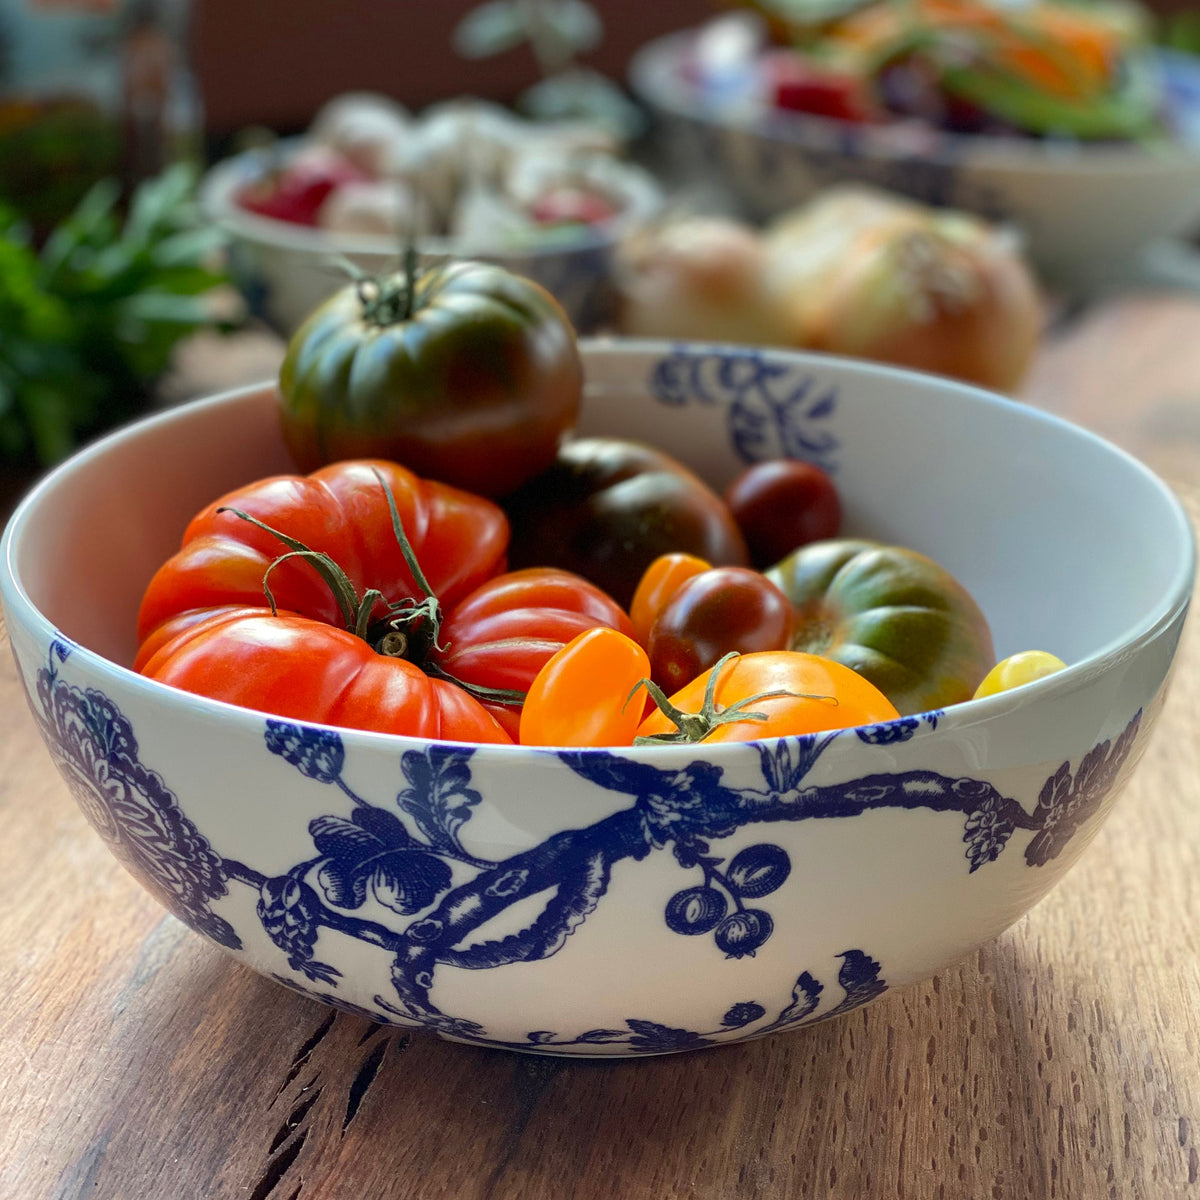 An Arcadia Vegetable Serving Bowl filled with tomatoes and other vegetables by Caskata Artisanal Home.